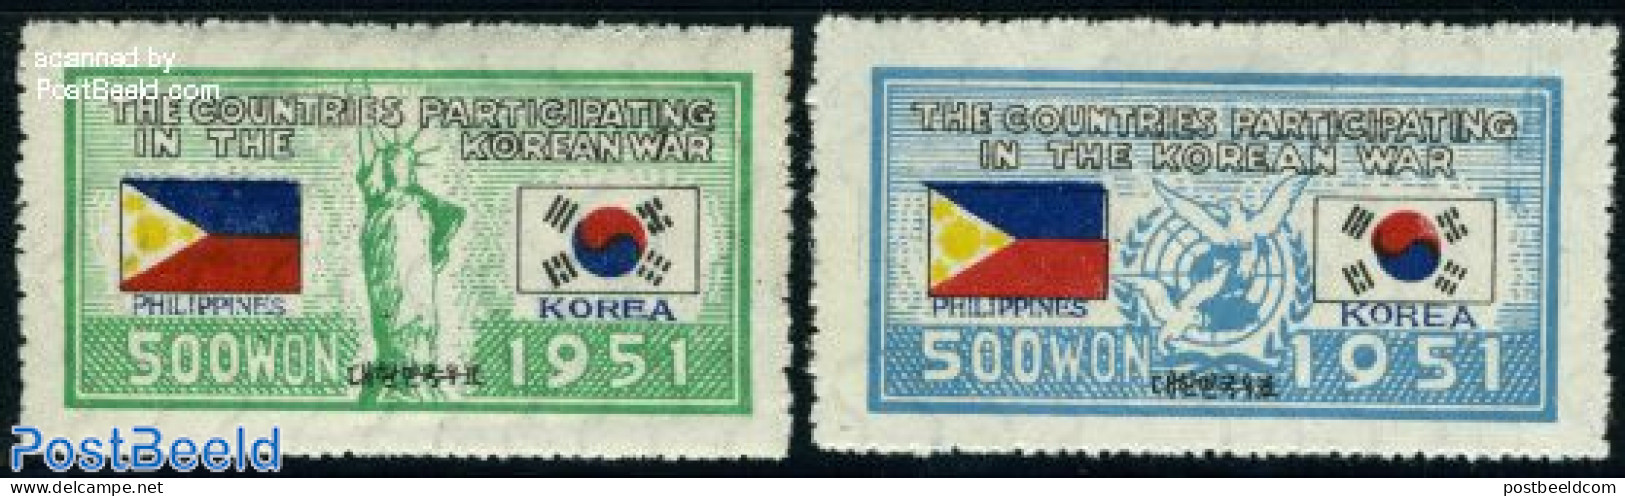 Korea, South 1951 UNO War Support, Philipines 2v, Mint NH, History - Nature - Flags - United Nations - Birds - Korea, South